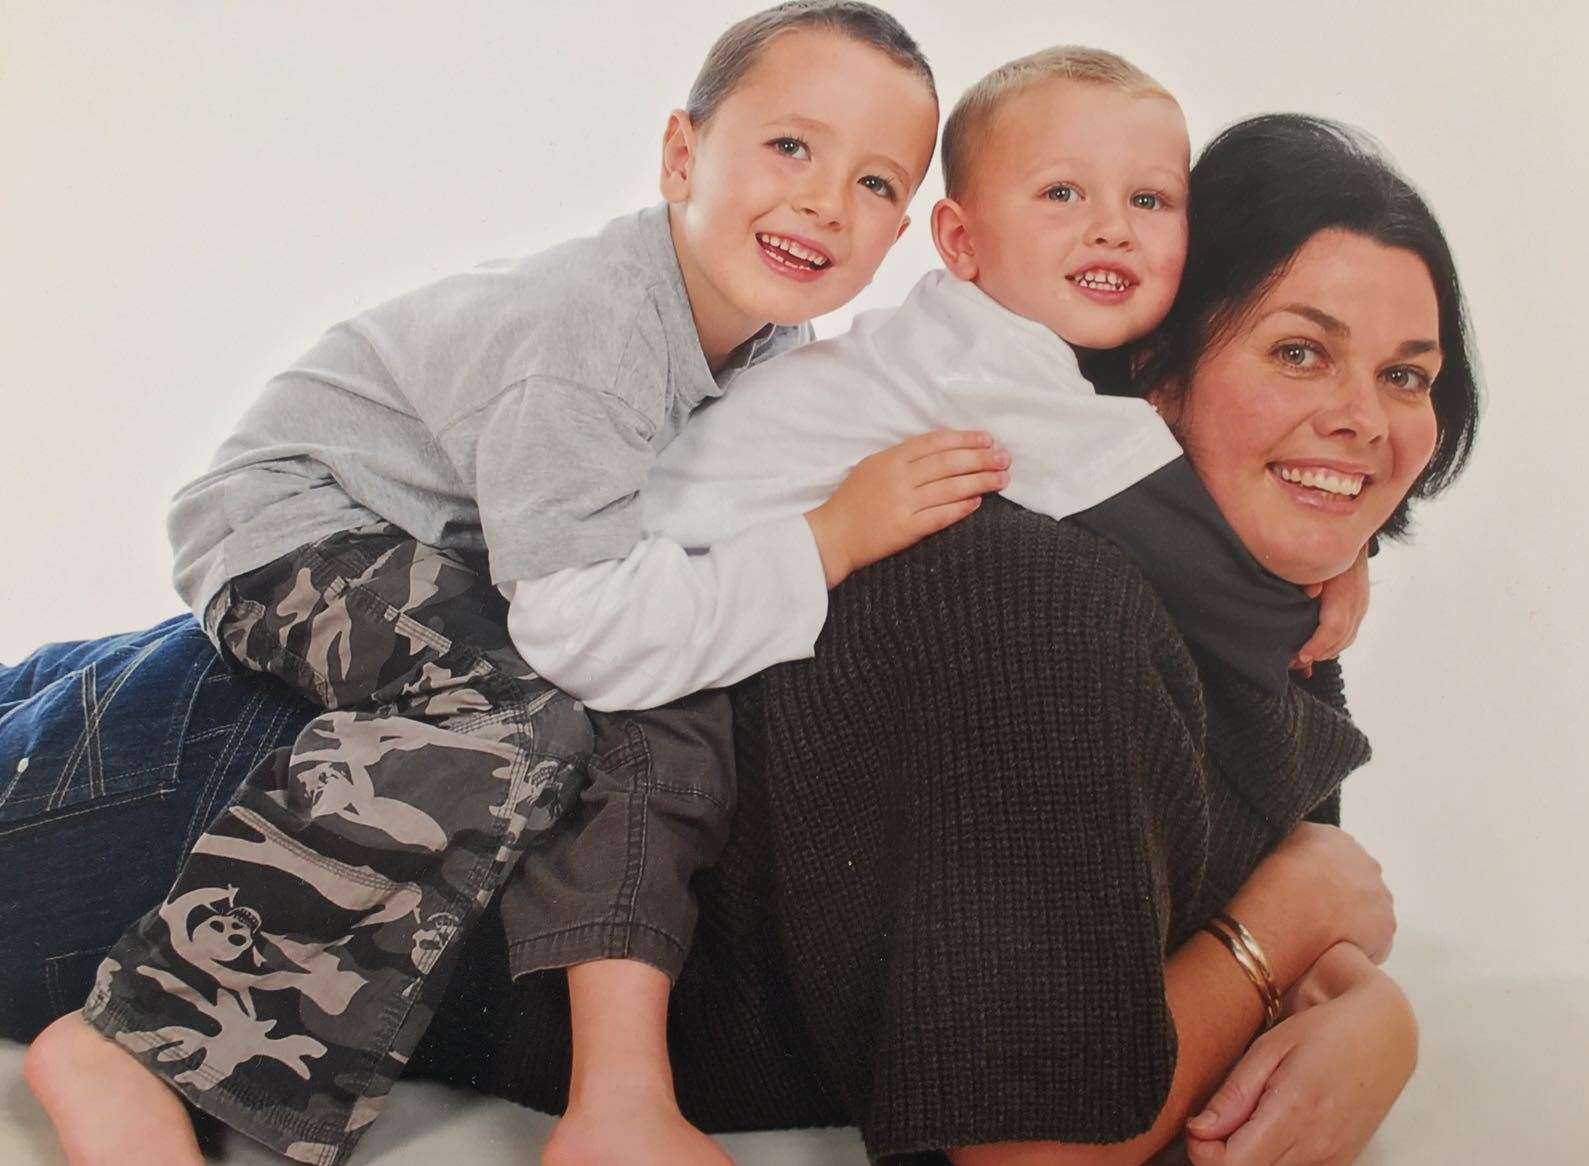 Leanne pictured with her two boys Luke and Jack